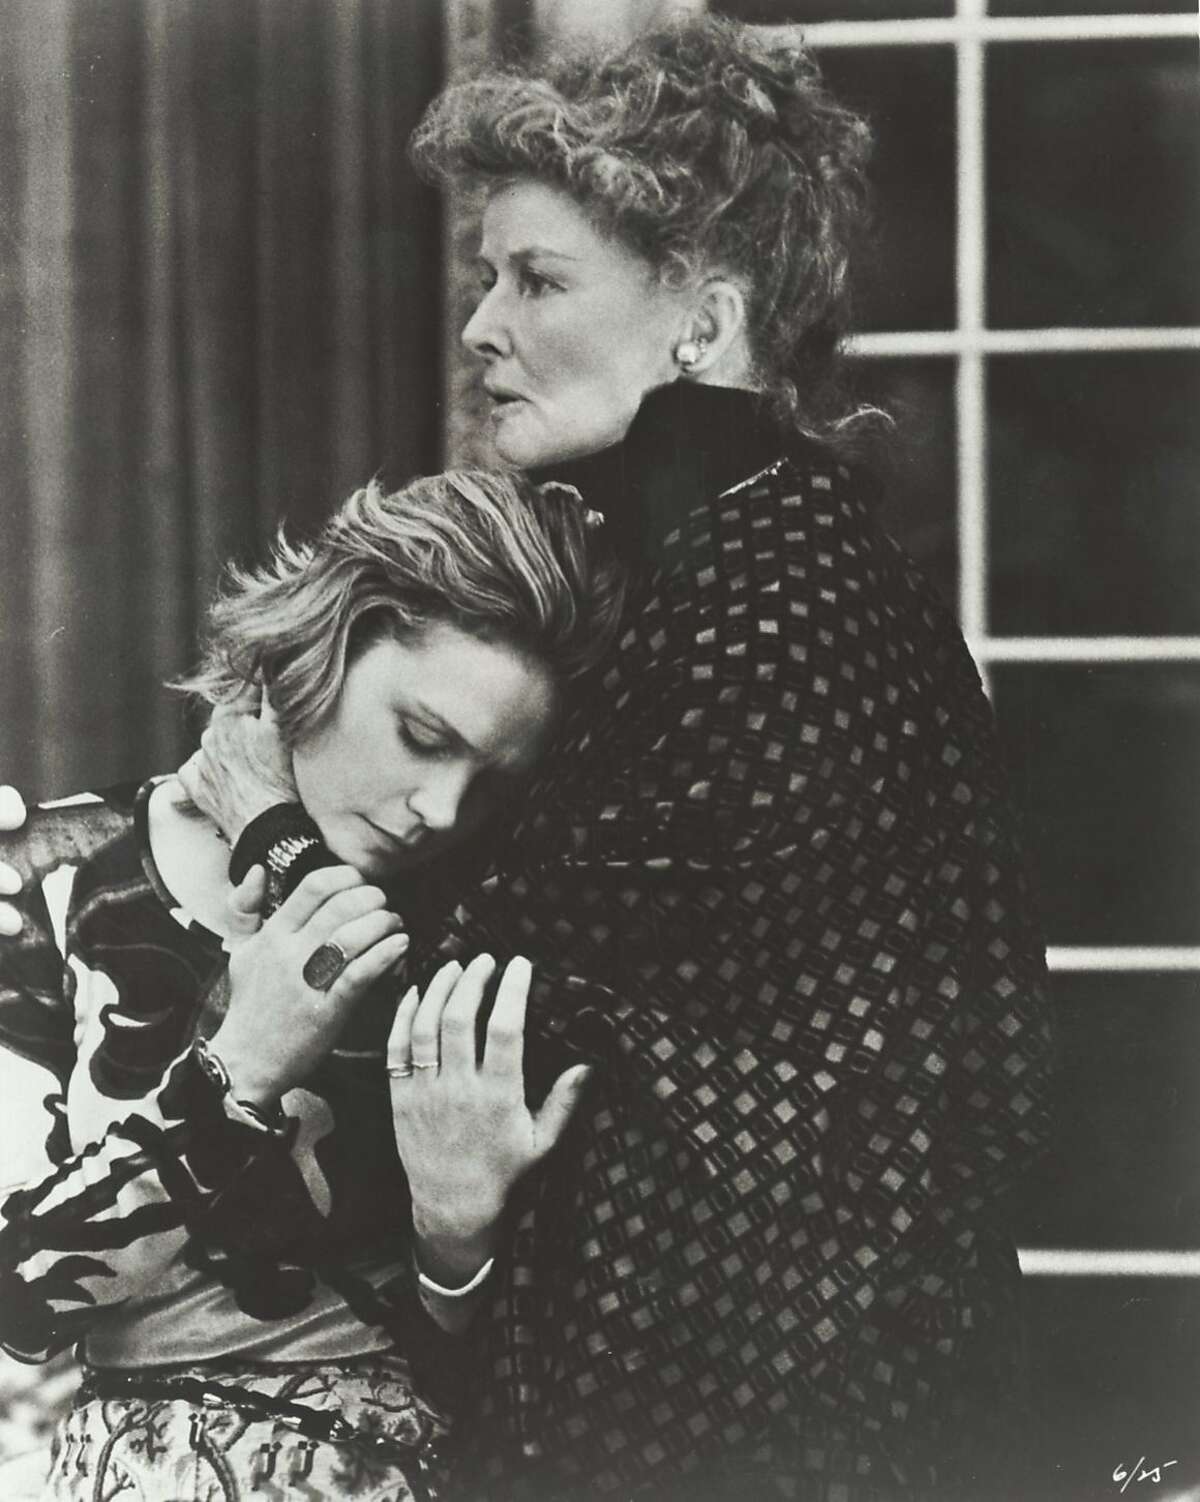 KATHERINE HEPBURN (LEFT) AND LEE REMICK IN "A DELICATE BALANCE" JULY 22, 1973